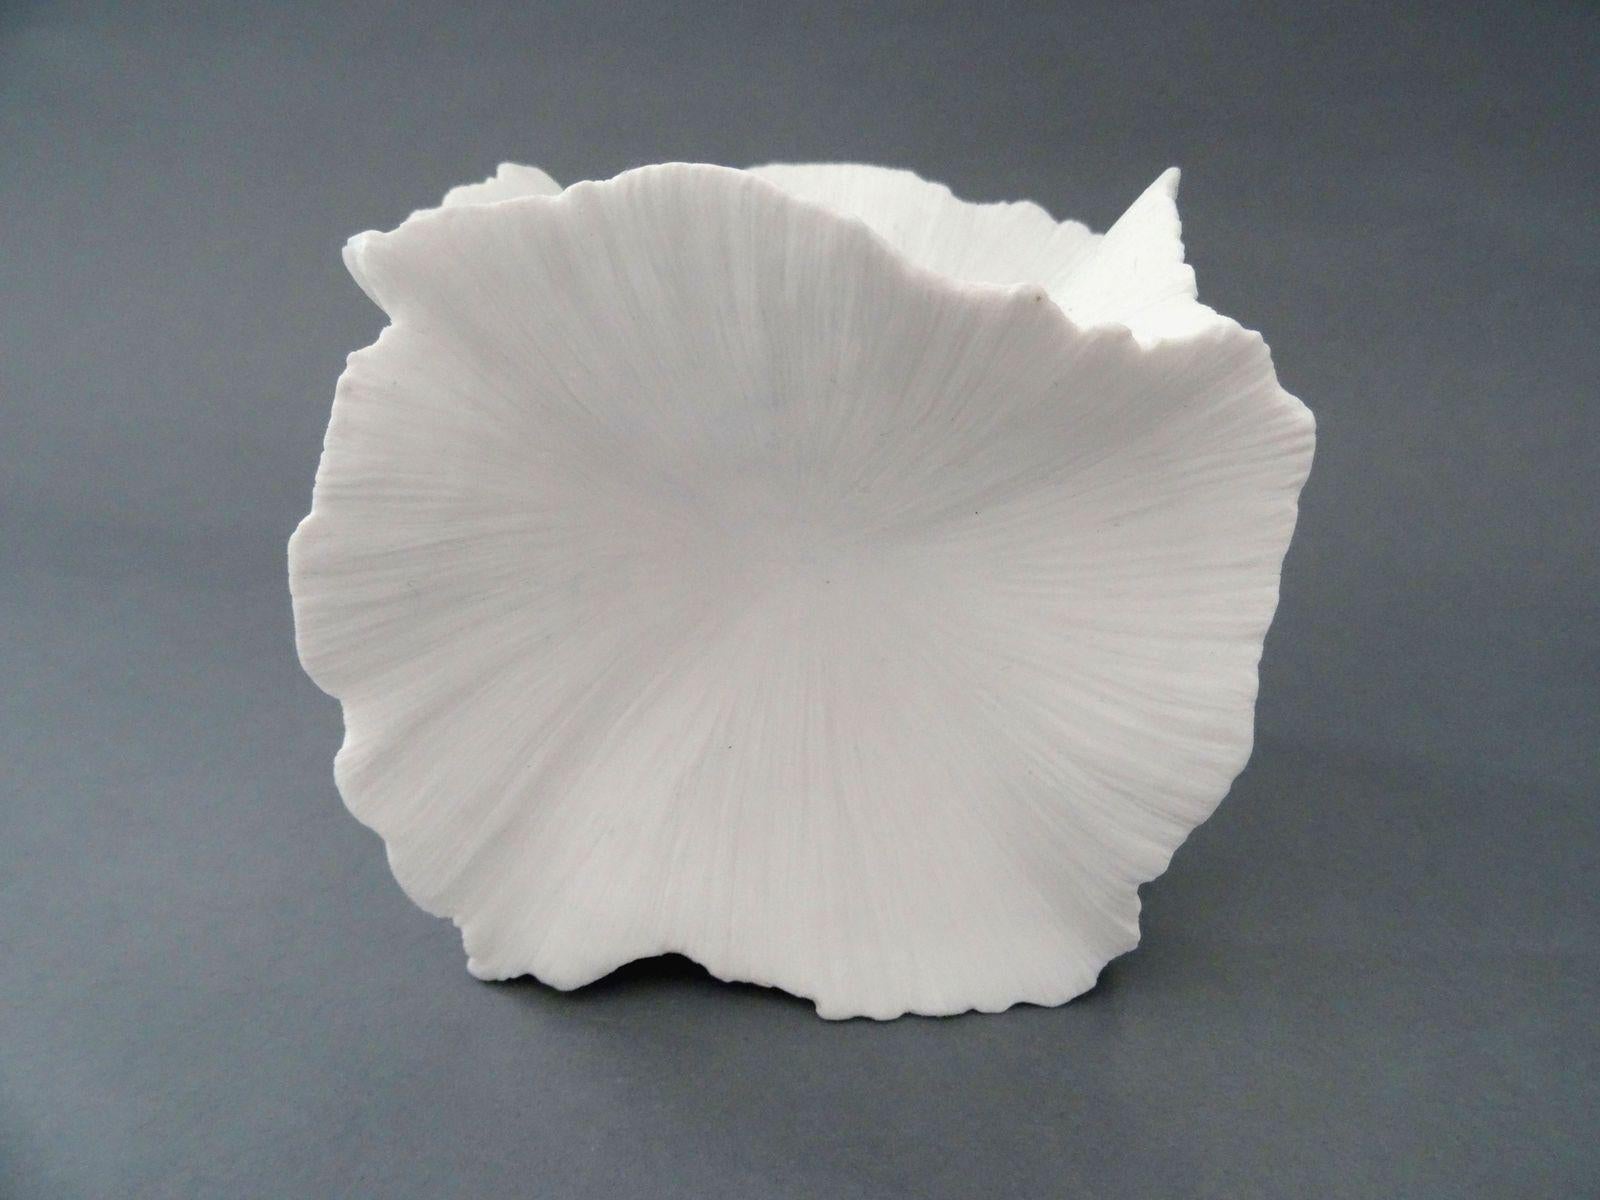 Blooming. White porcelain decoration, size 11x11x11 cm - Abstract Sculpture by Elina Titane 